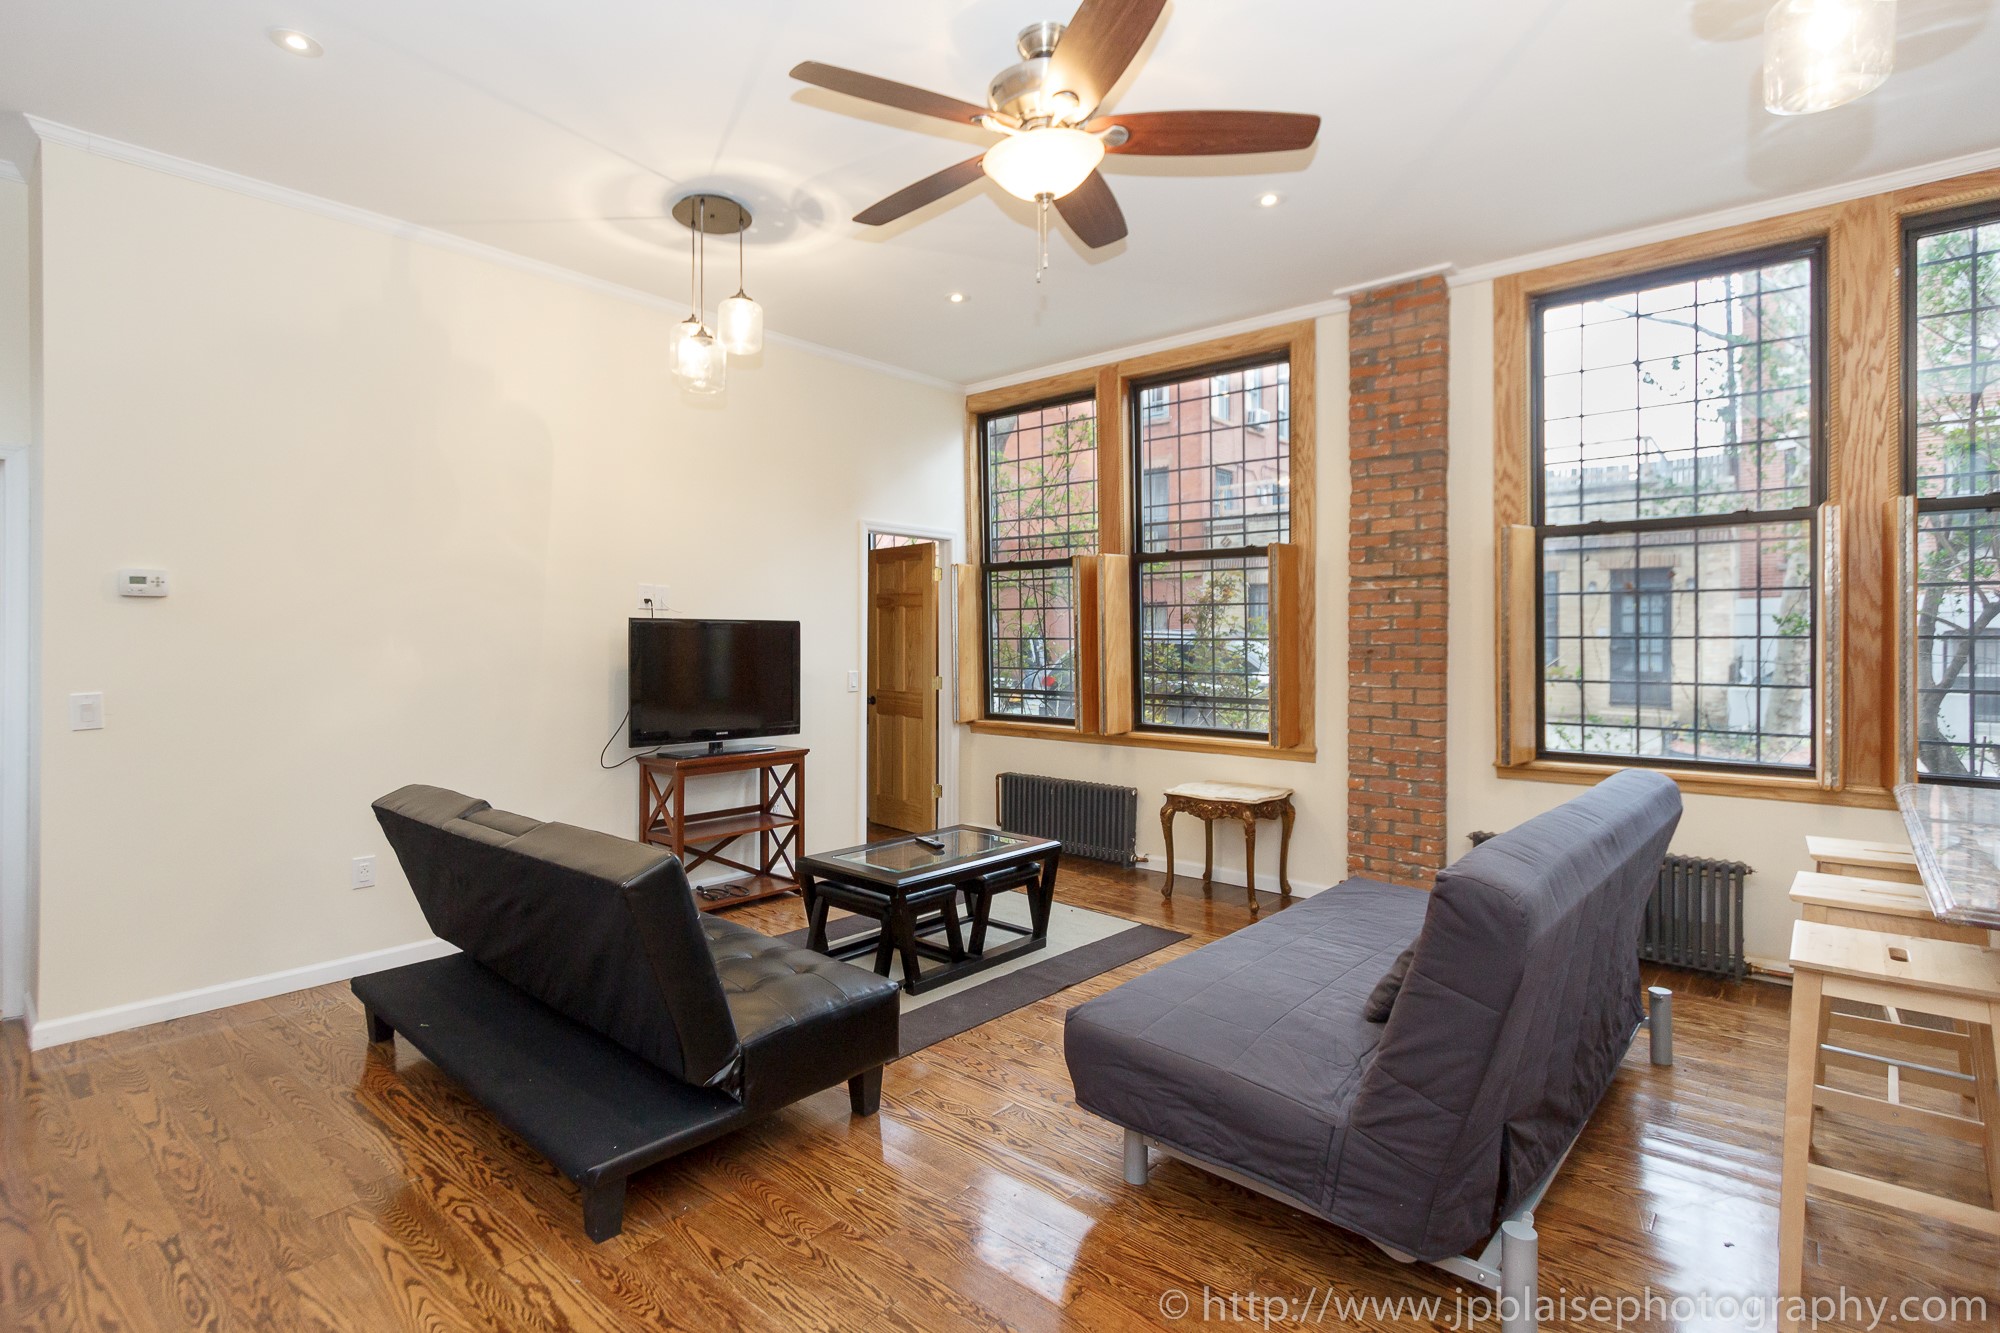 Real estate photographer work two bedroom in boerum hill brooklyn picture of living room